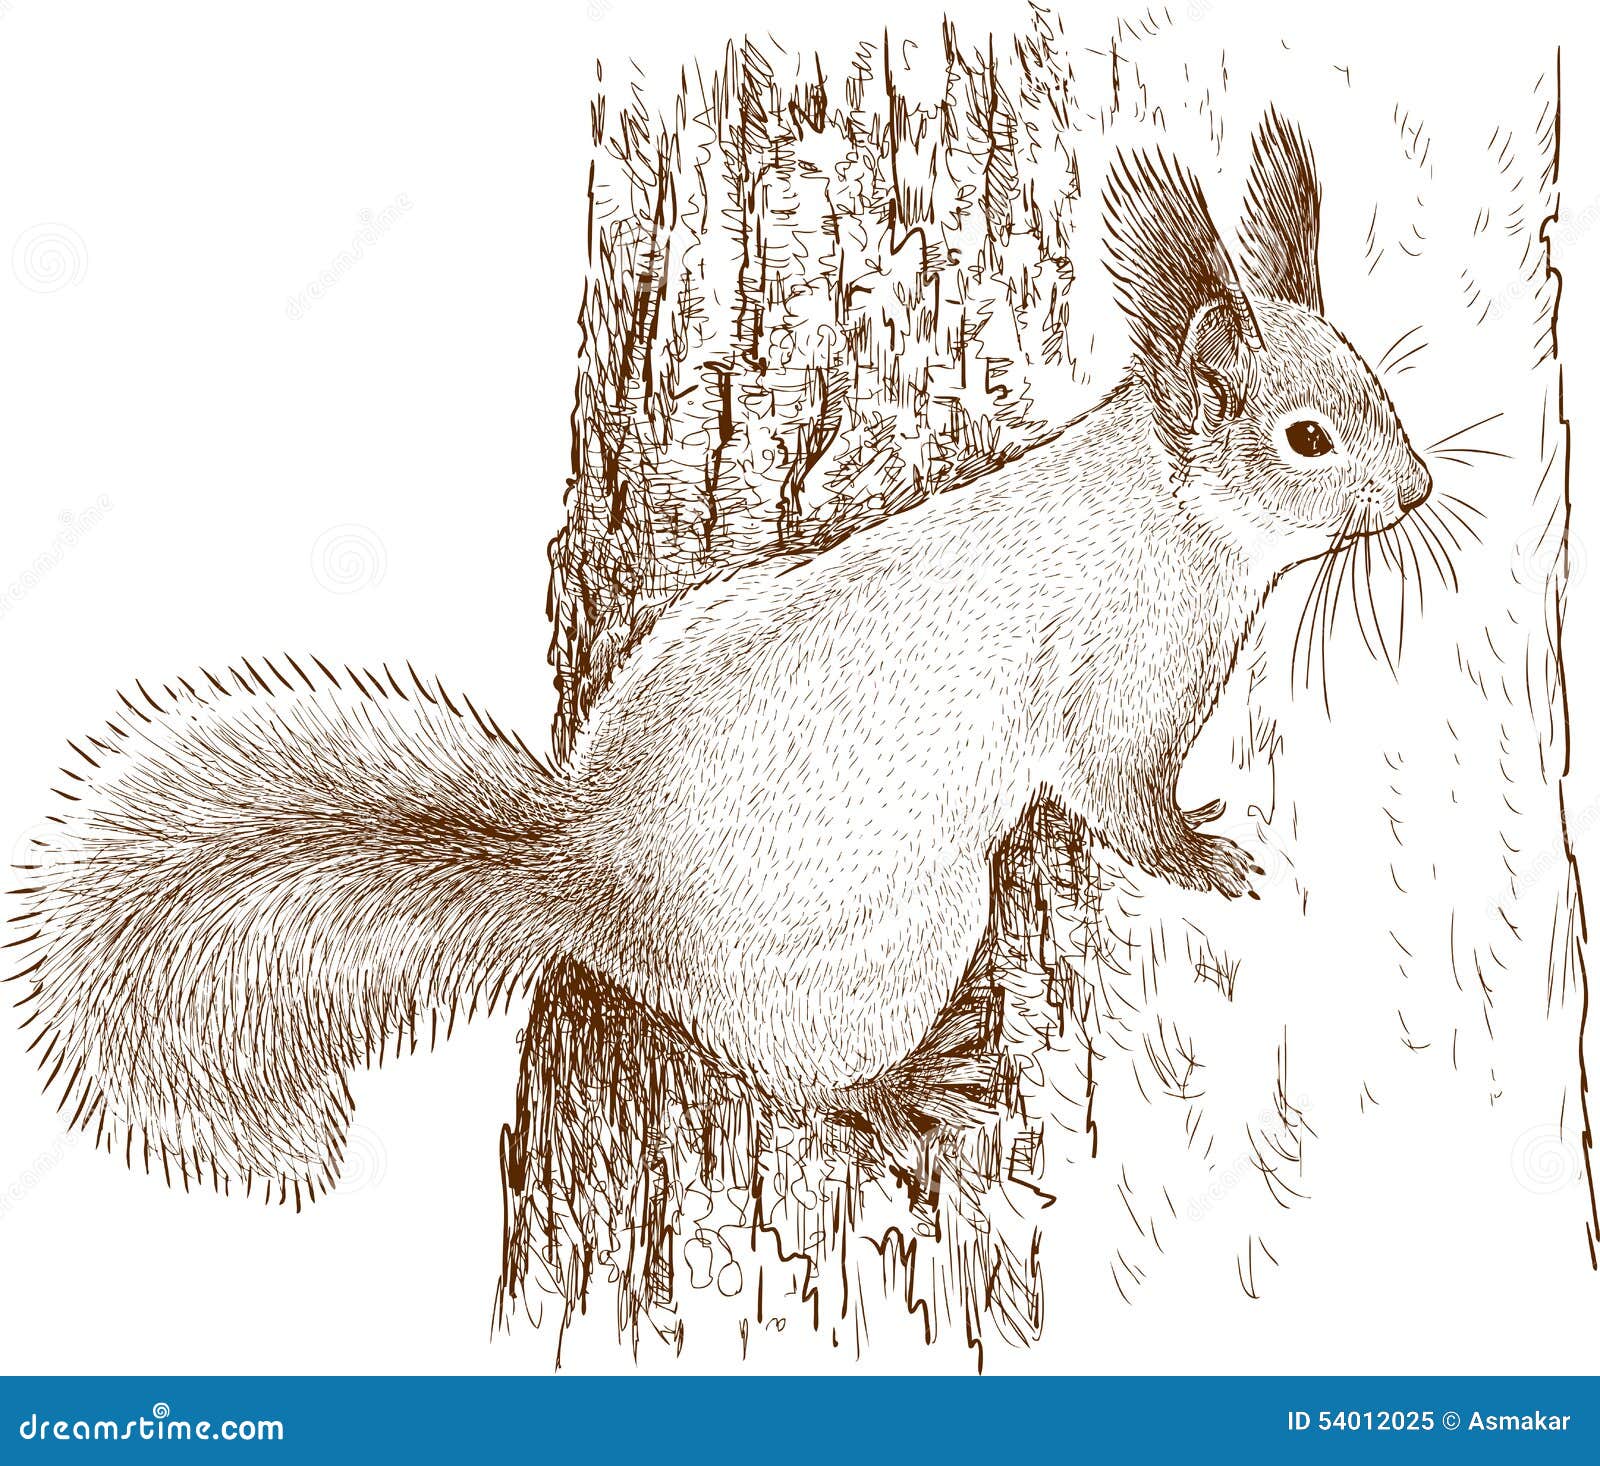 List 95+ Images how to draw a squirrel on a tree Sharp